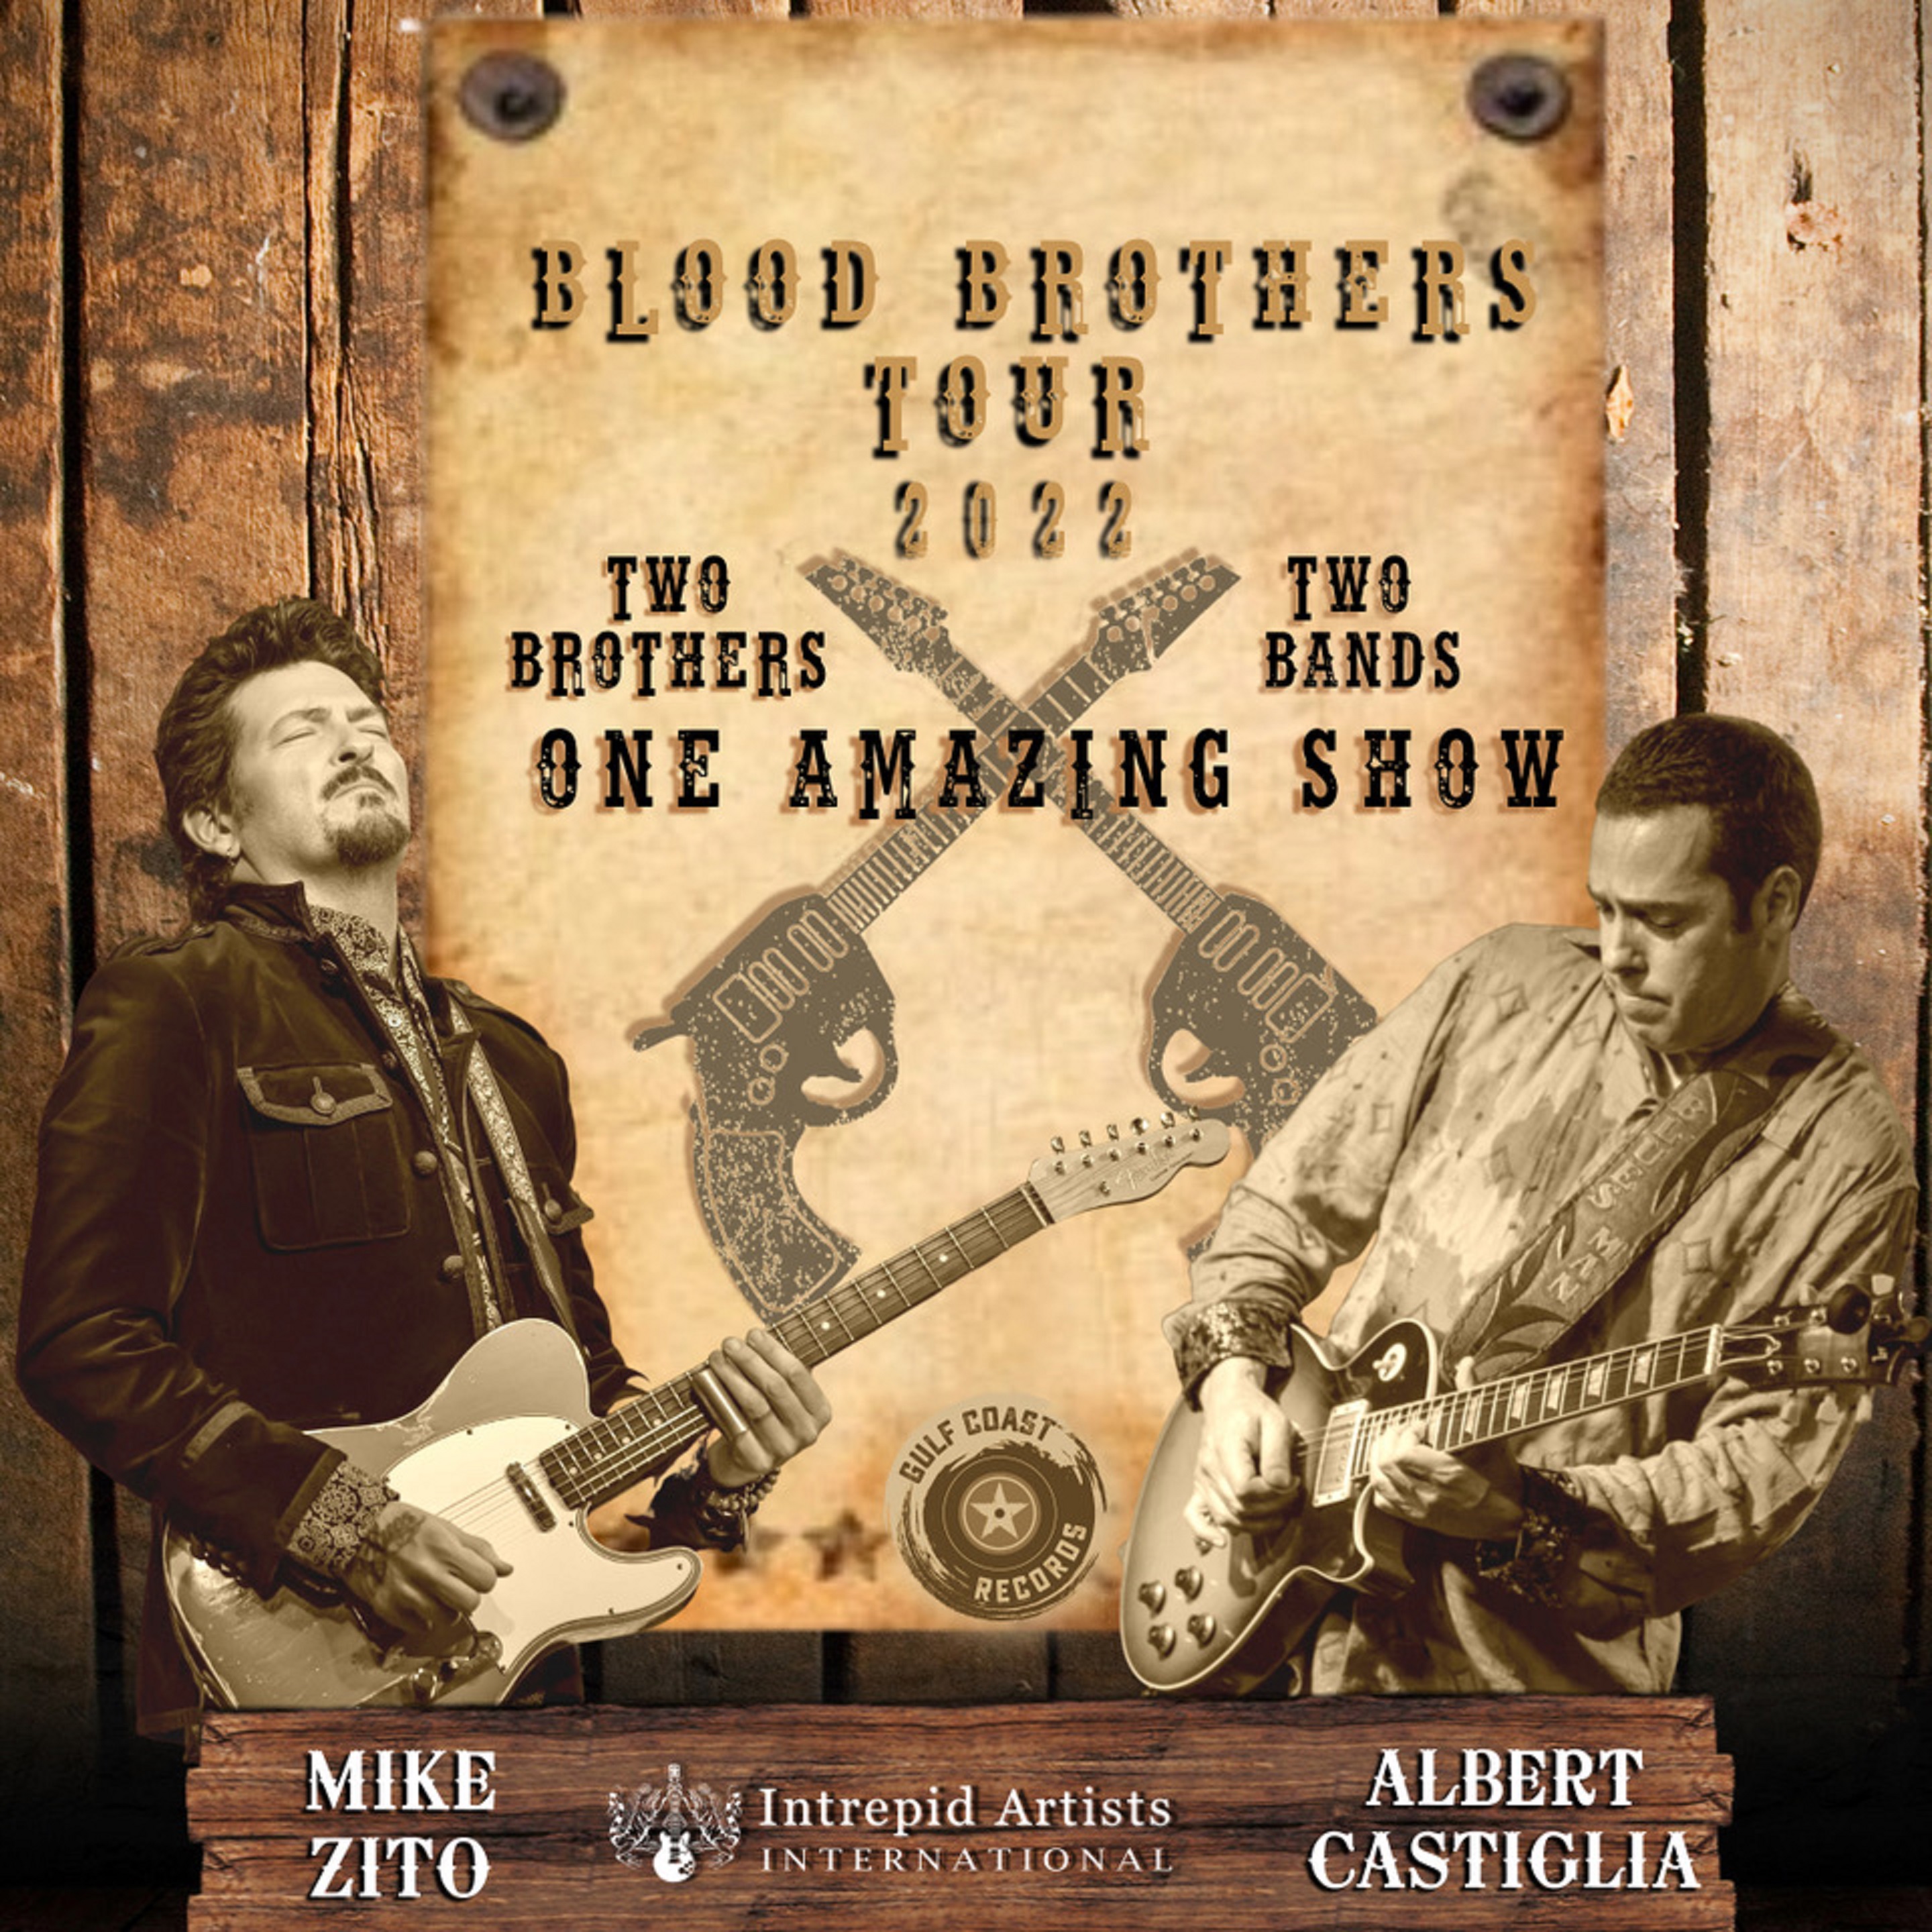 Mike Zito and Albert Castiglia Unite for "Blood Brothers" Tour in March and April